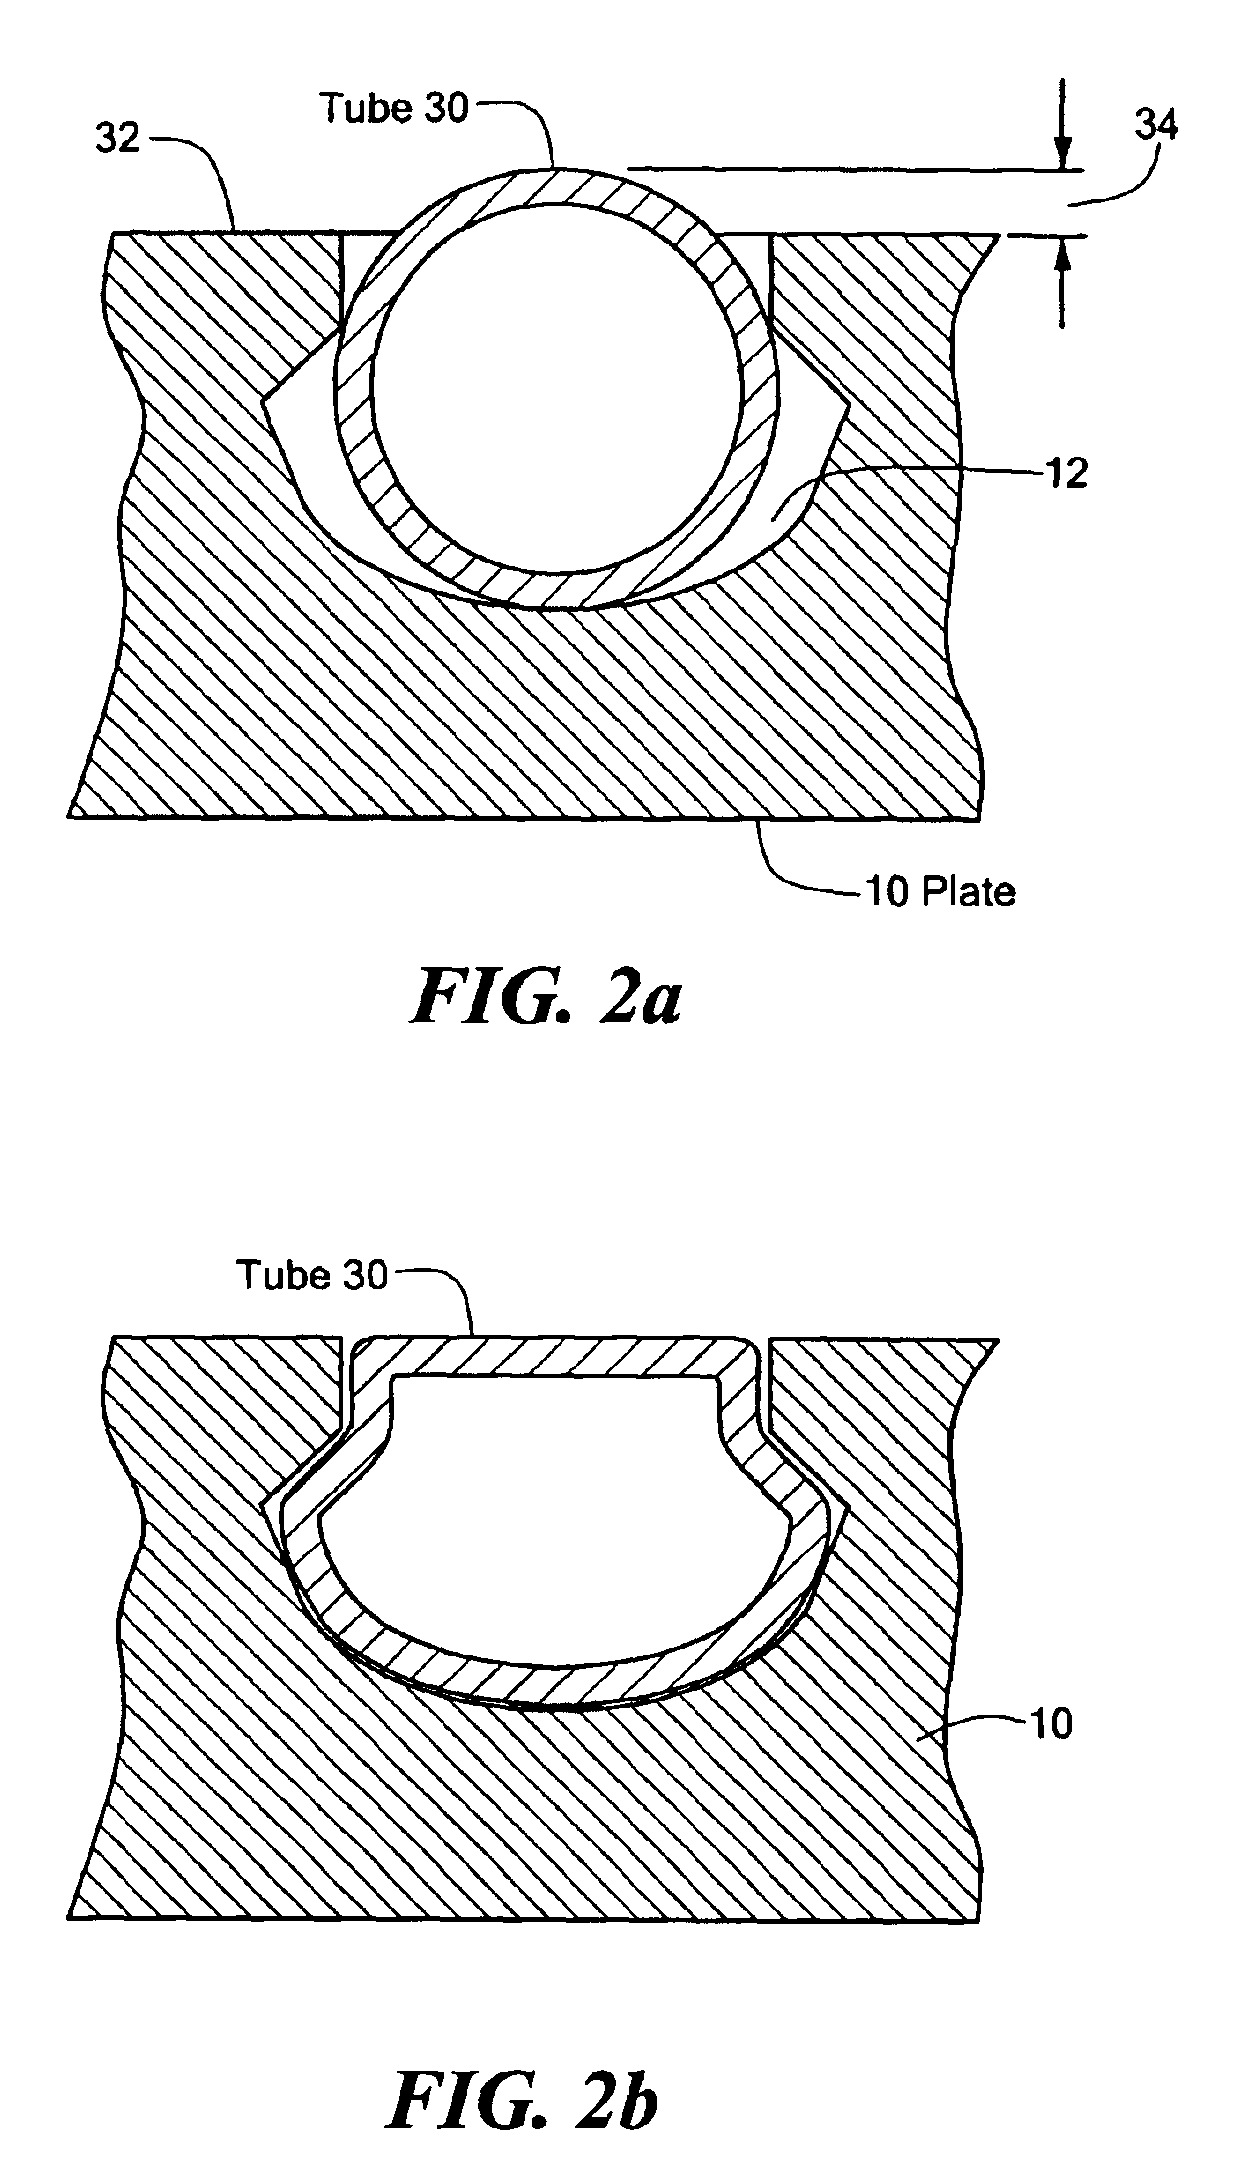 Tube-in-plate cooling or heating plate